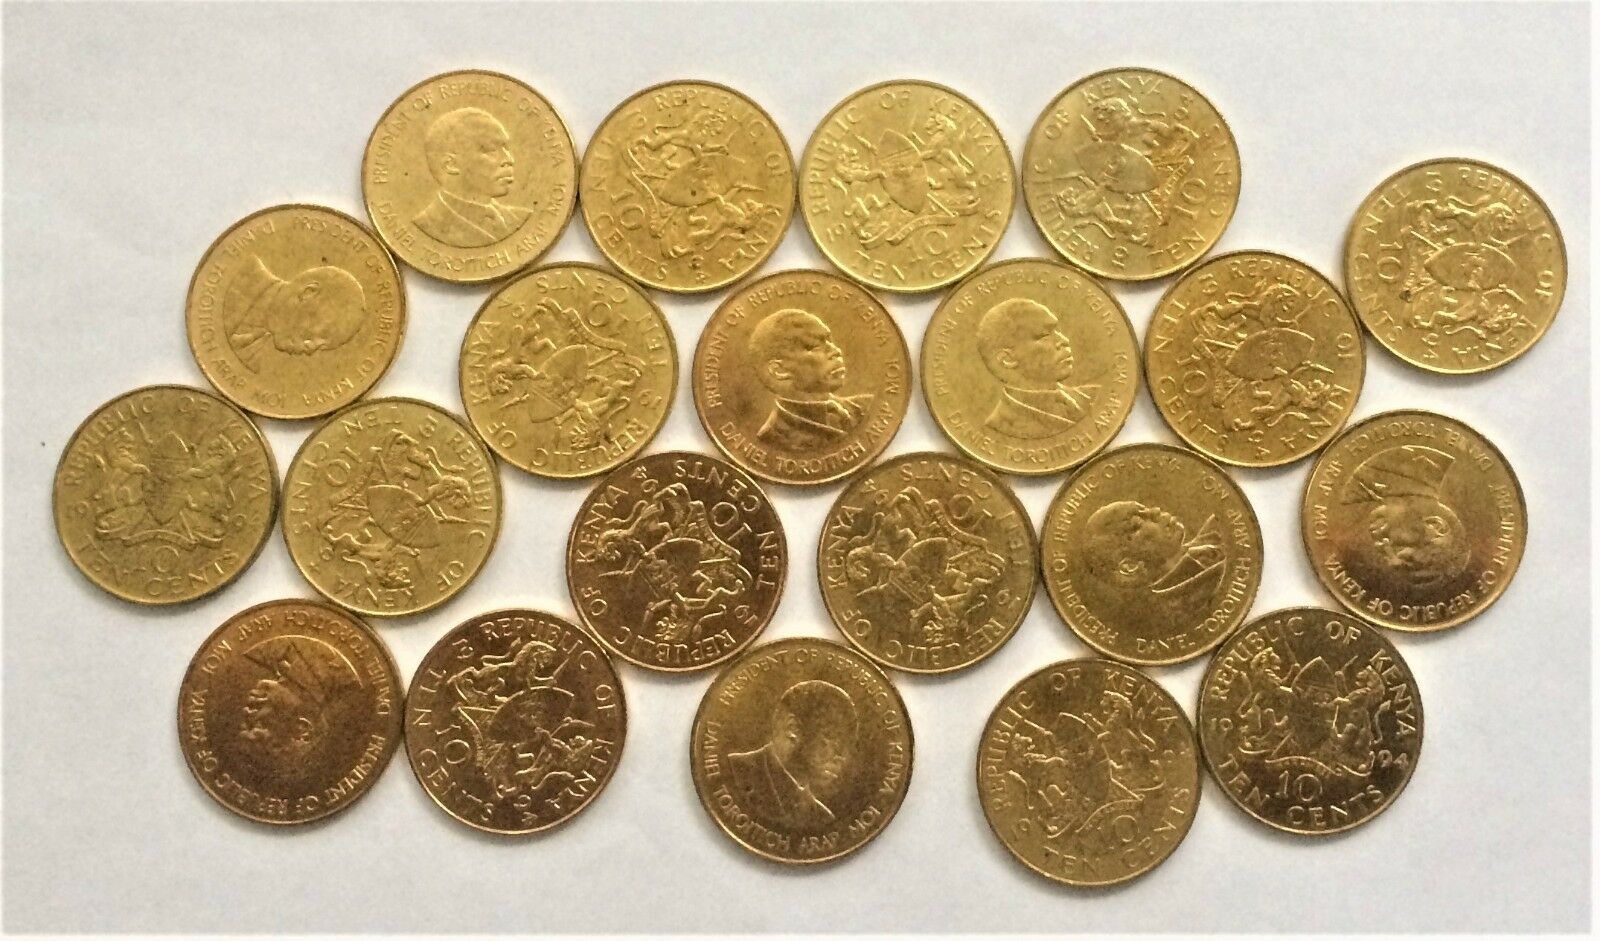 WHOLESALE - 100 KENYA 10 CENTS COINS of 1994 with PRESIDENTIAL PORTRAIT KM # 18a